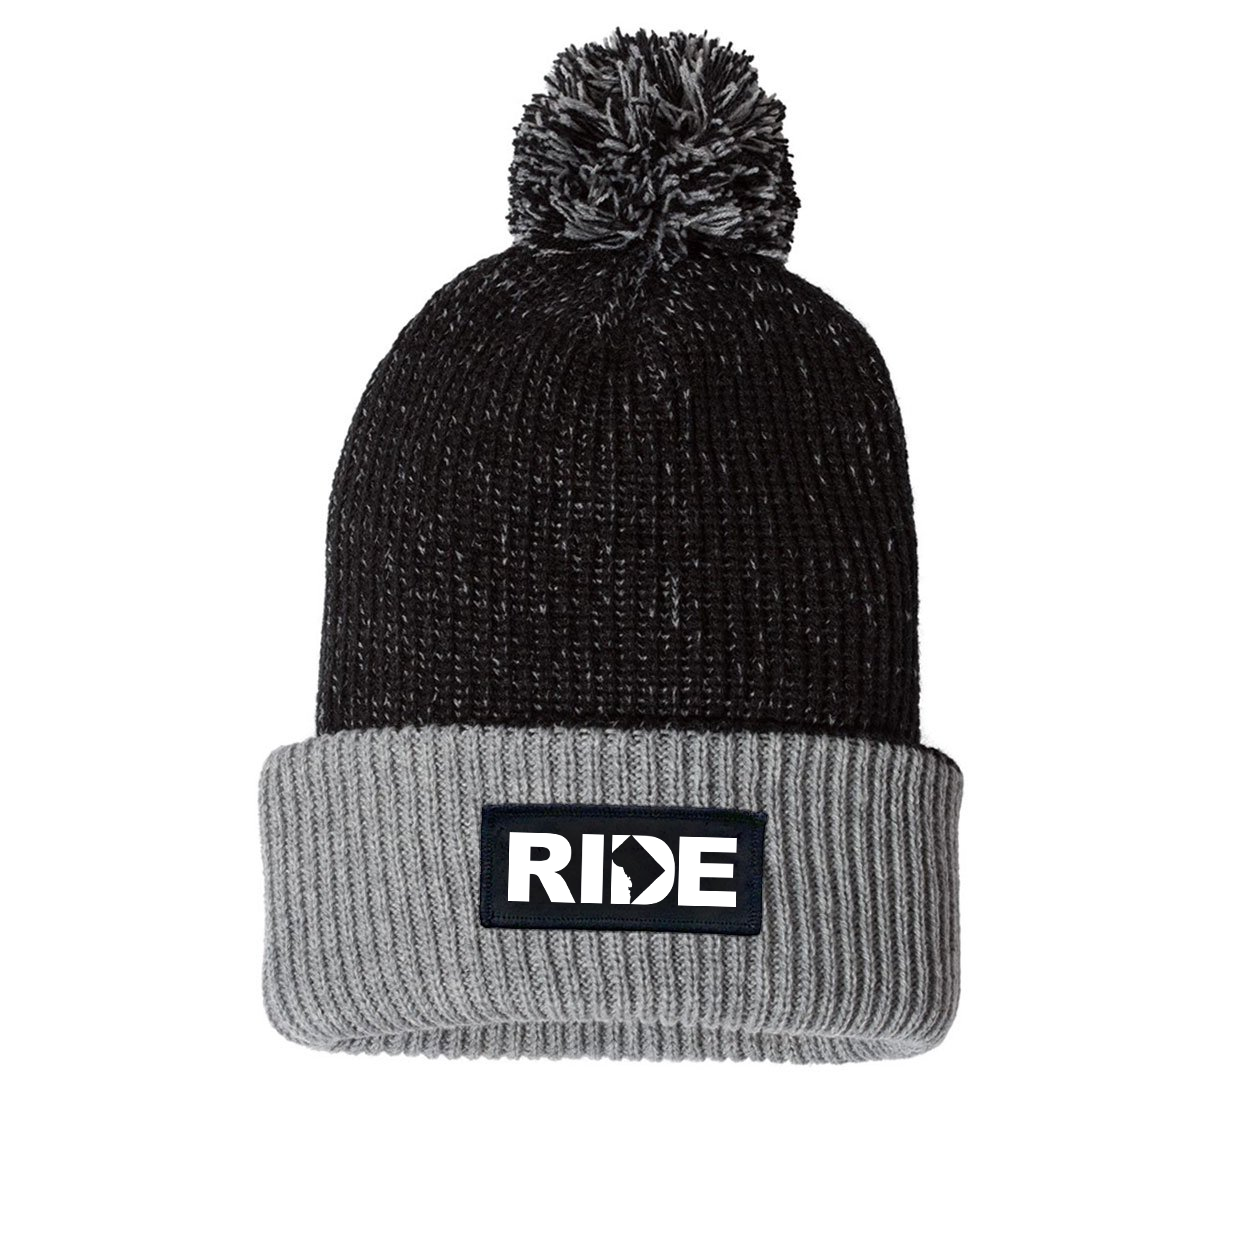 Ride District of Columbia Night Out Woven Patch Roll Up Pom Knit Beanie Black/Gray (White Logo)